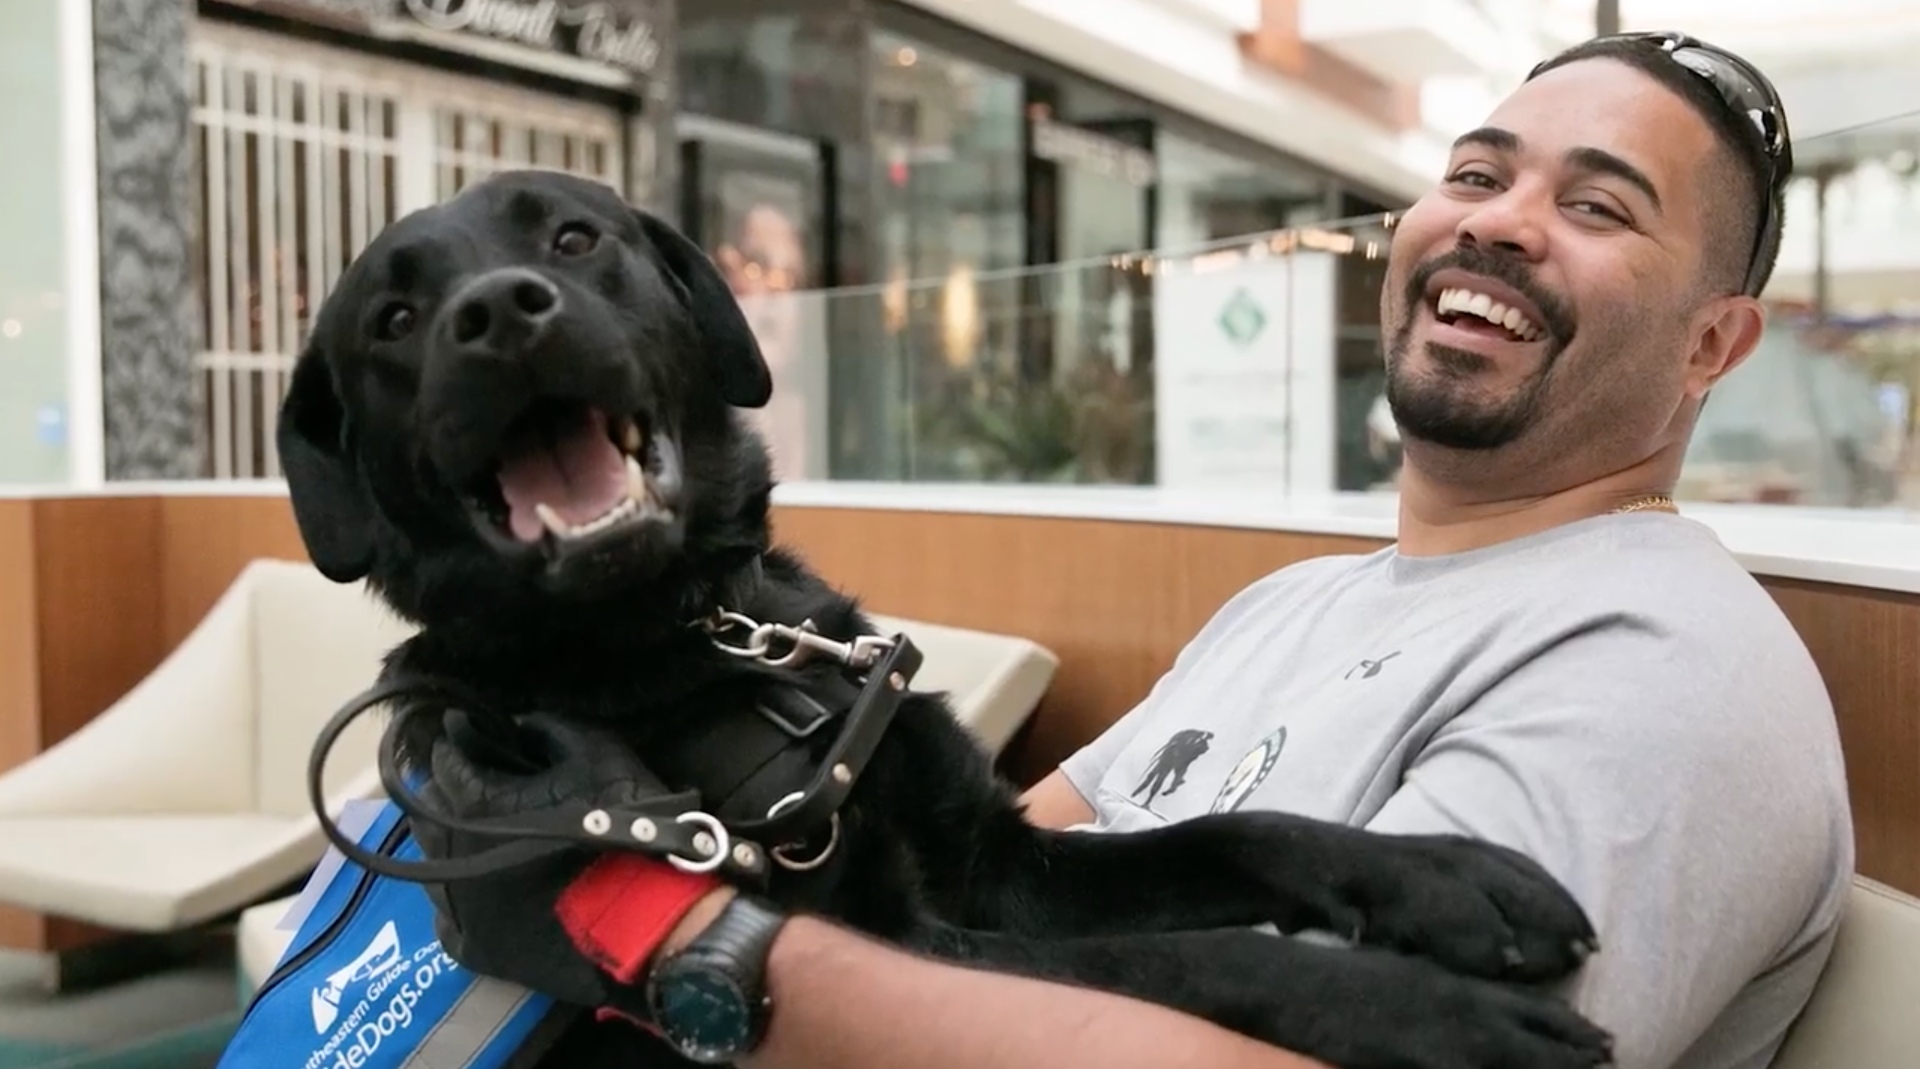 Man sits in chair with a black dogs two front legs on his arm both smiling at the camera